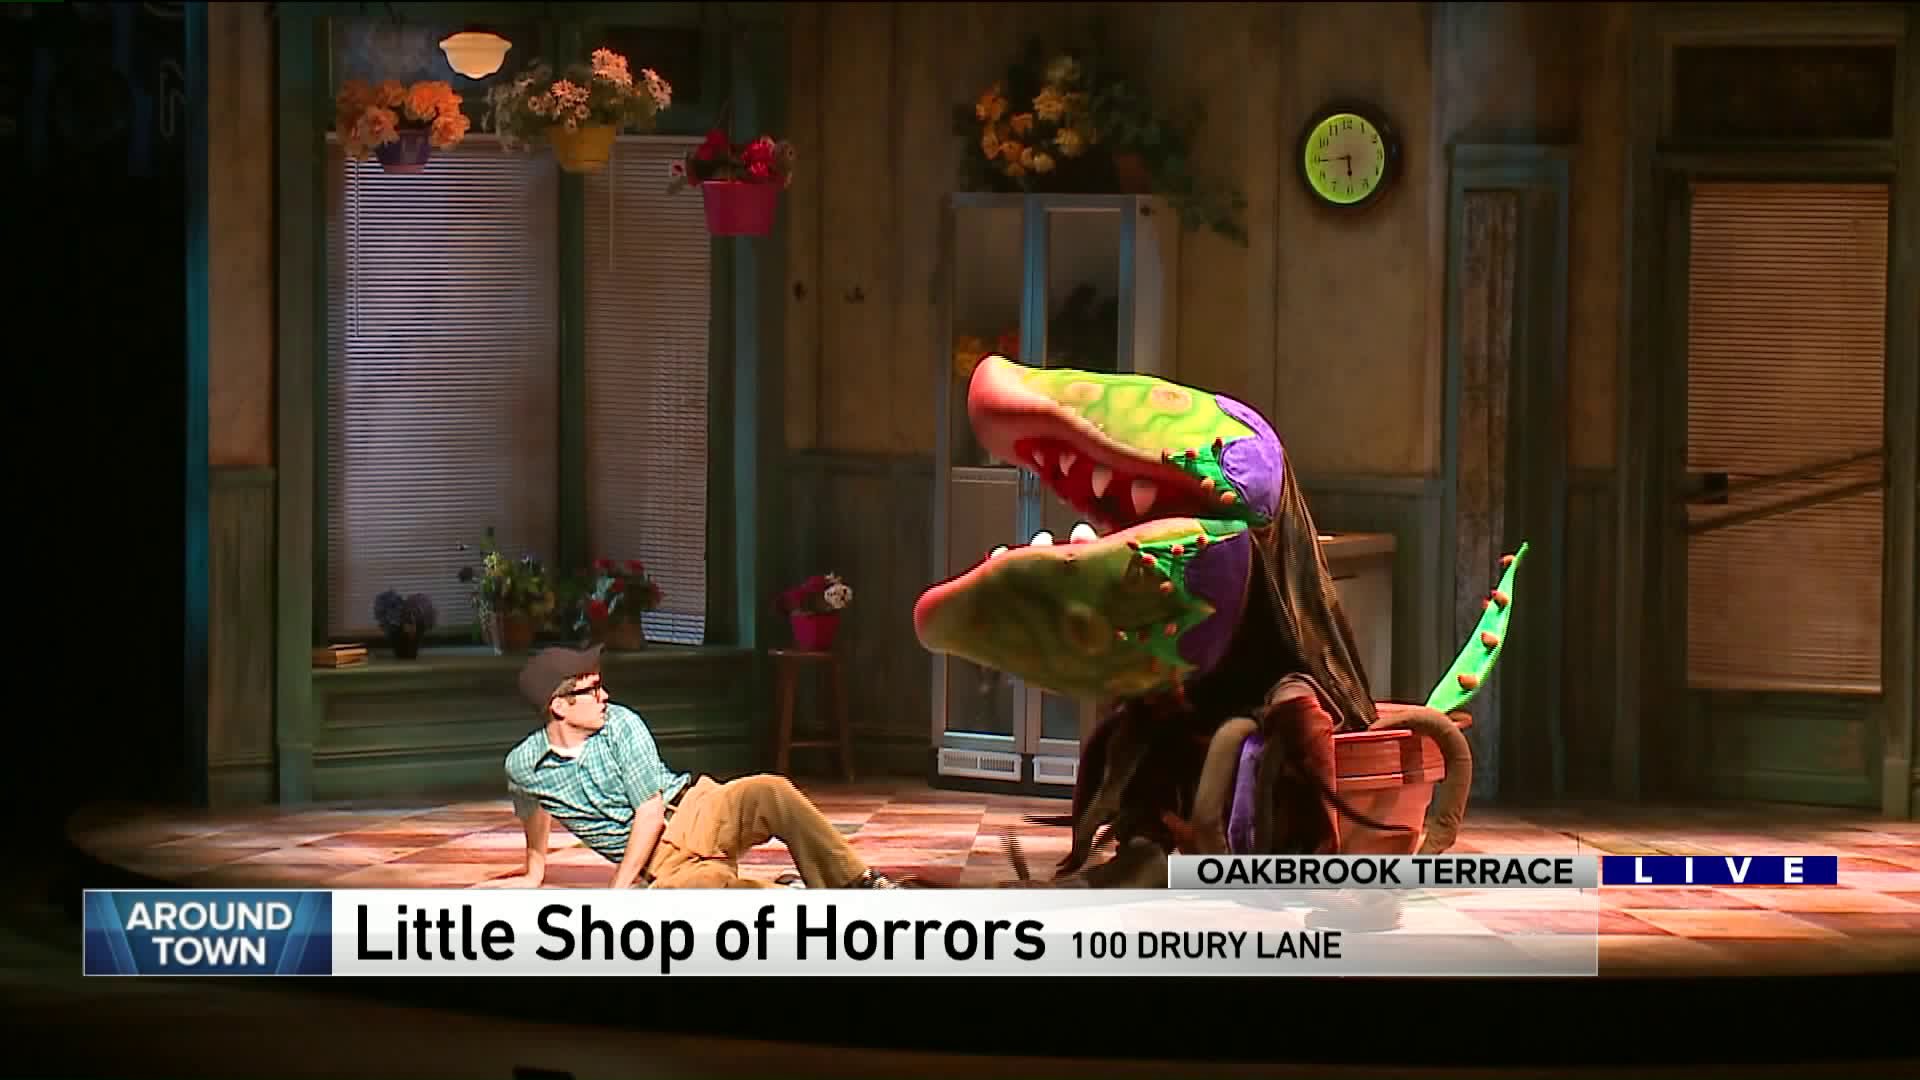 Around Town previews Little Shop of Horrors